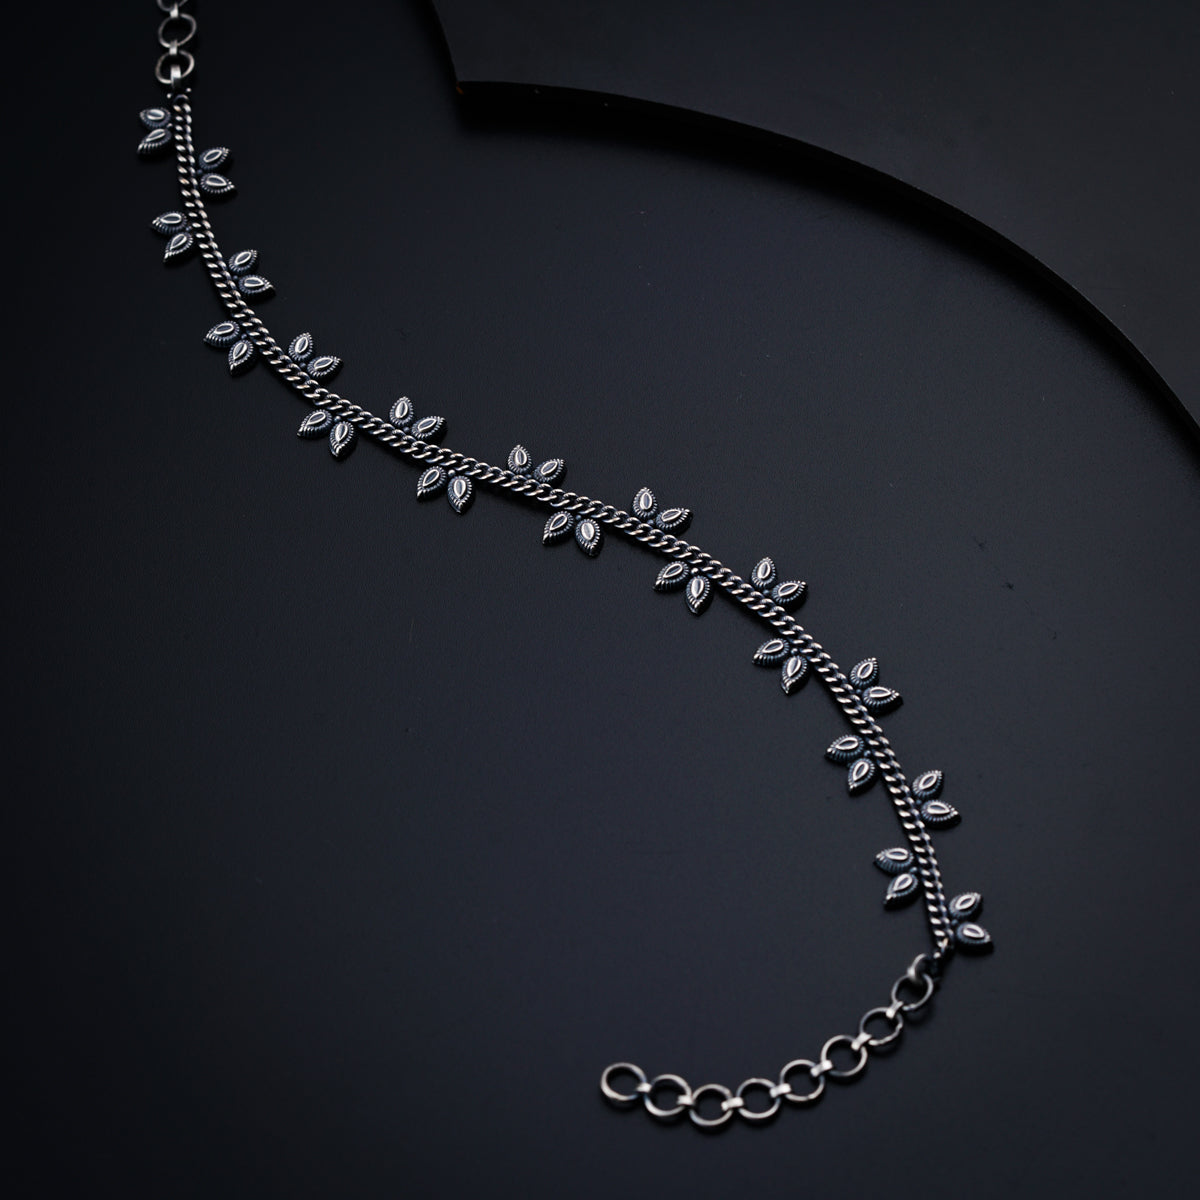 a silver necklace on a black background